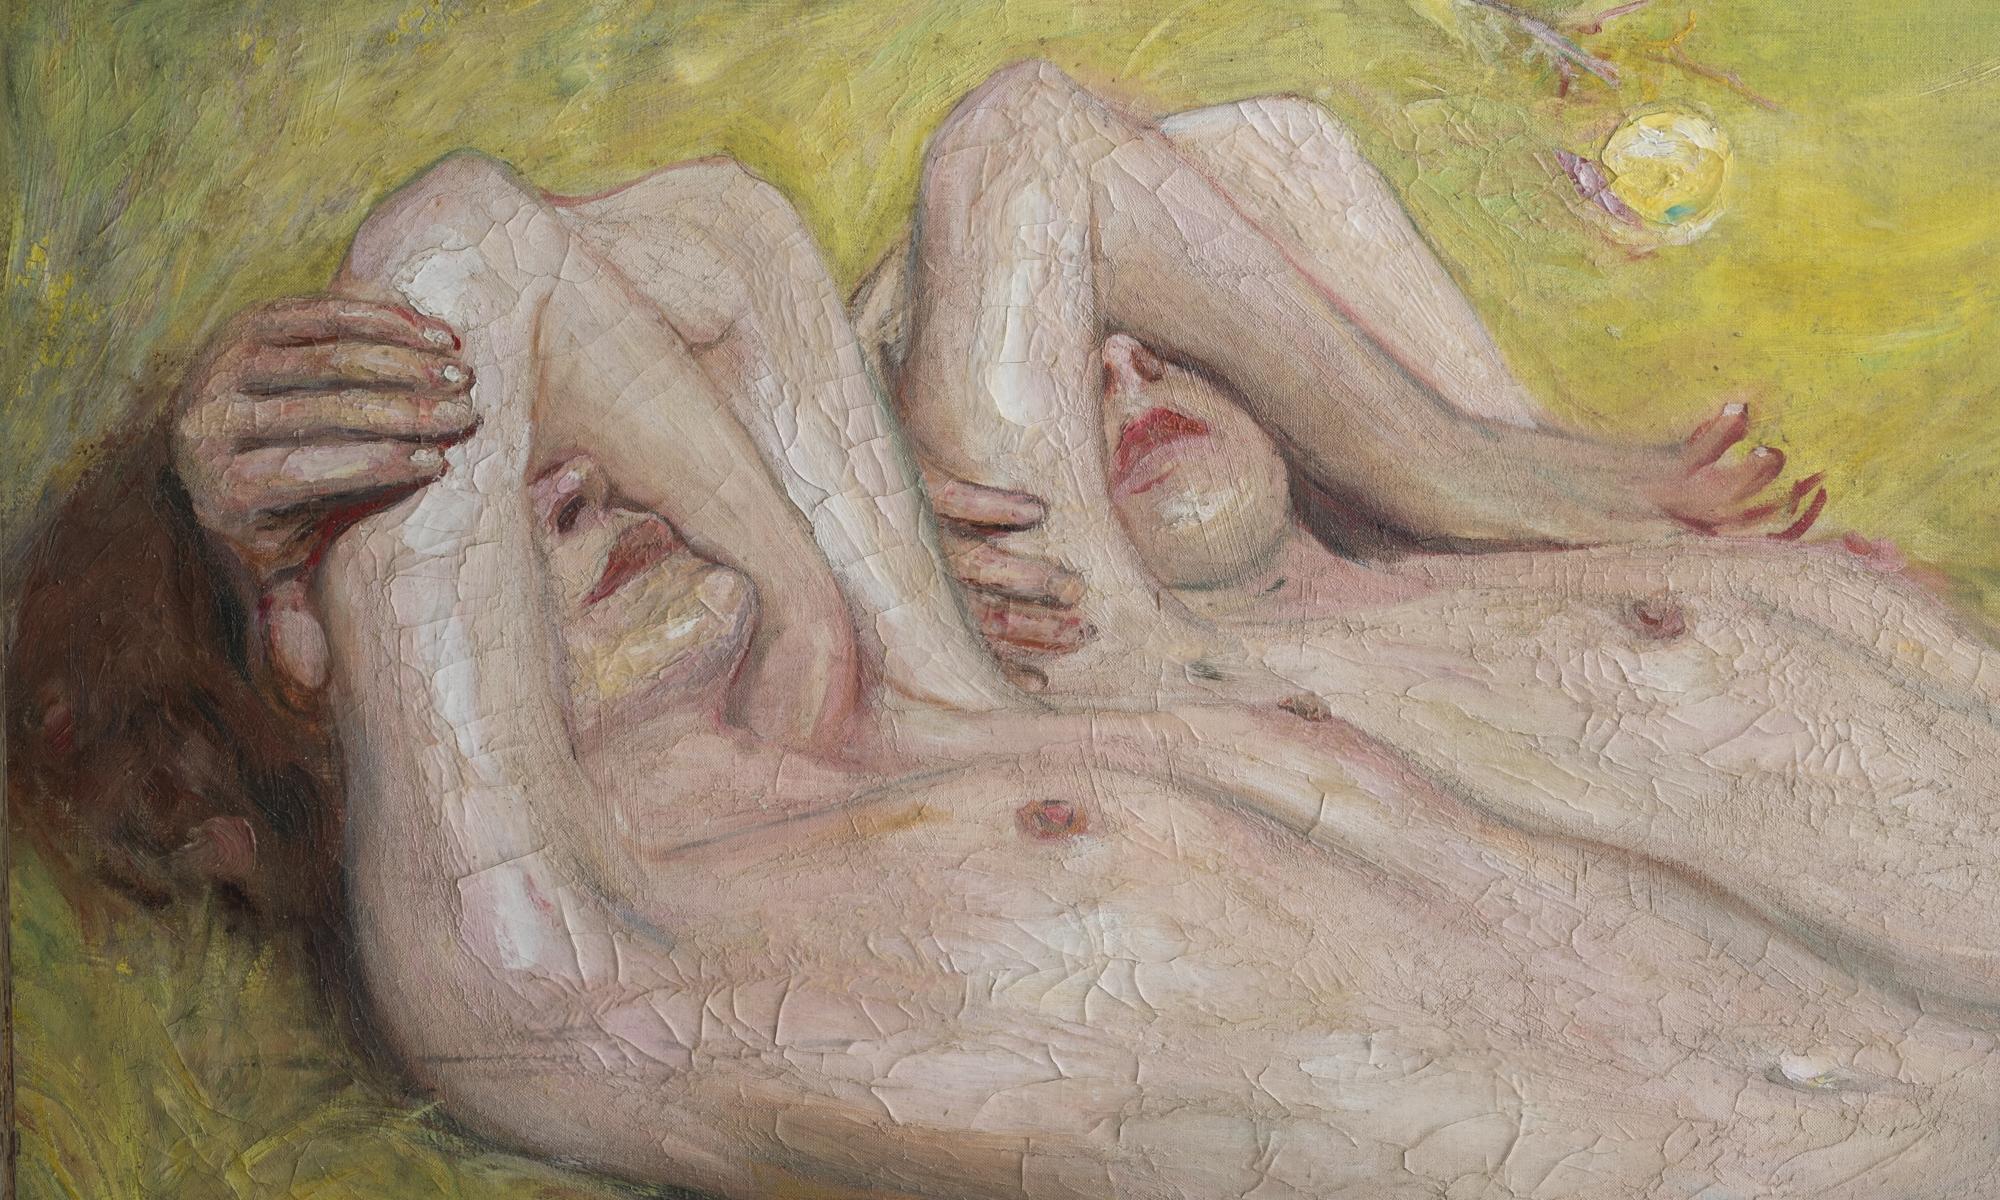 Oil on canvas painting of two reclining nudes with their faces covered. Original painted oak frame. Signed M.H.S.